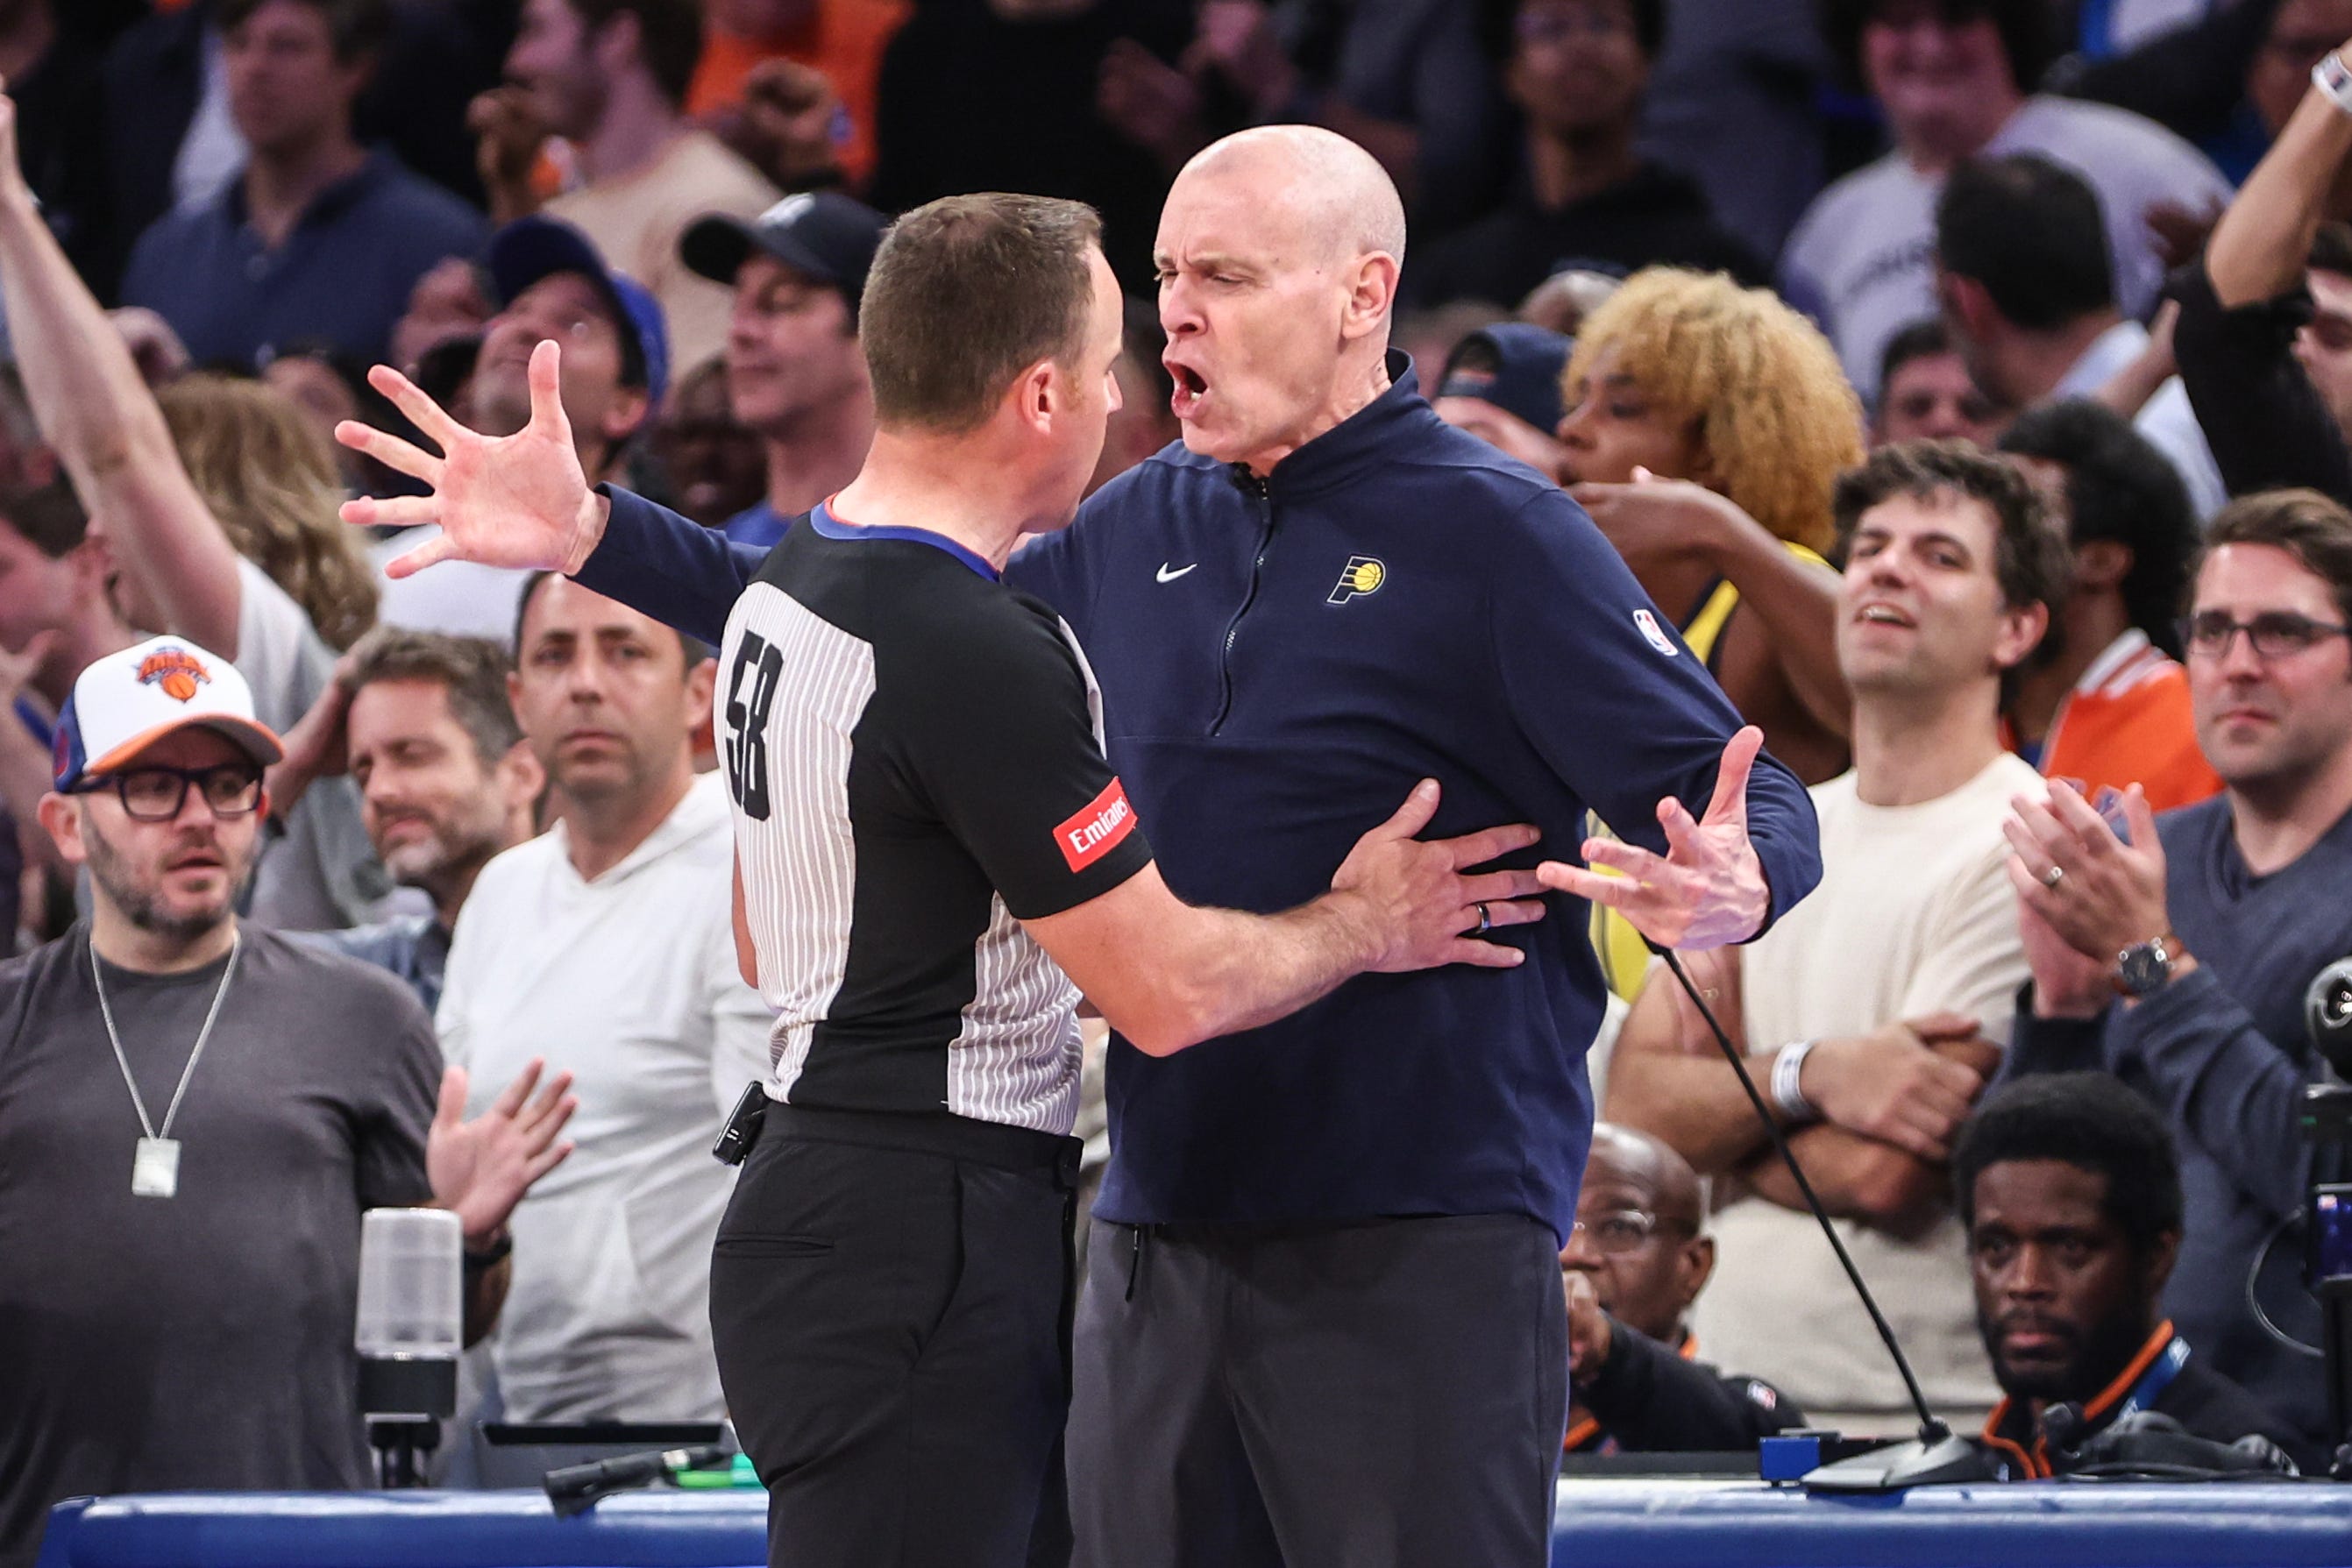 pacers coach rick carlisle has a point about nba officiating but not small-market bias